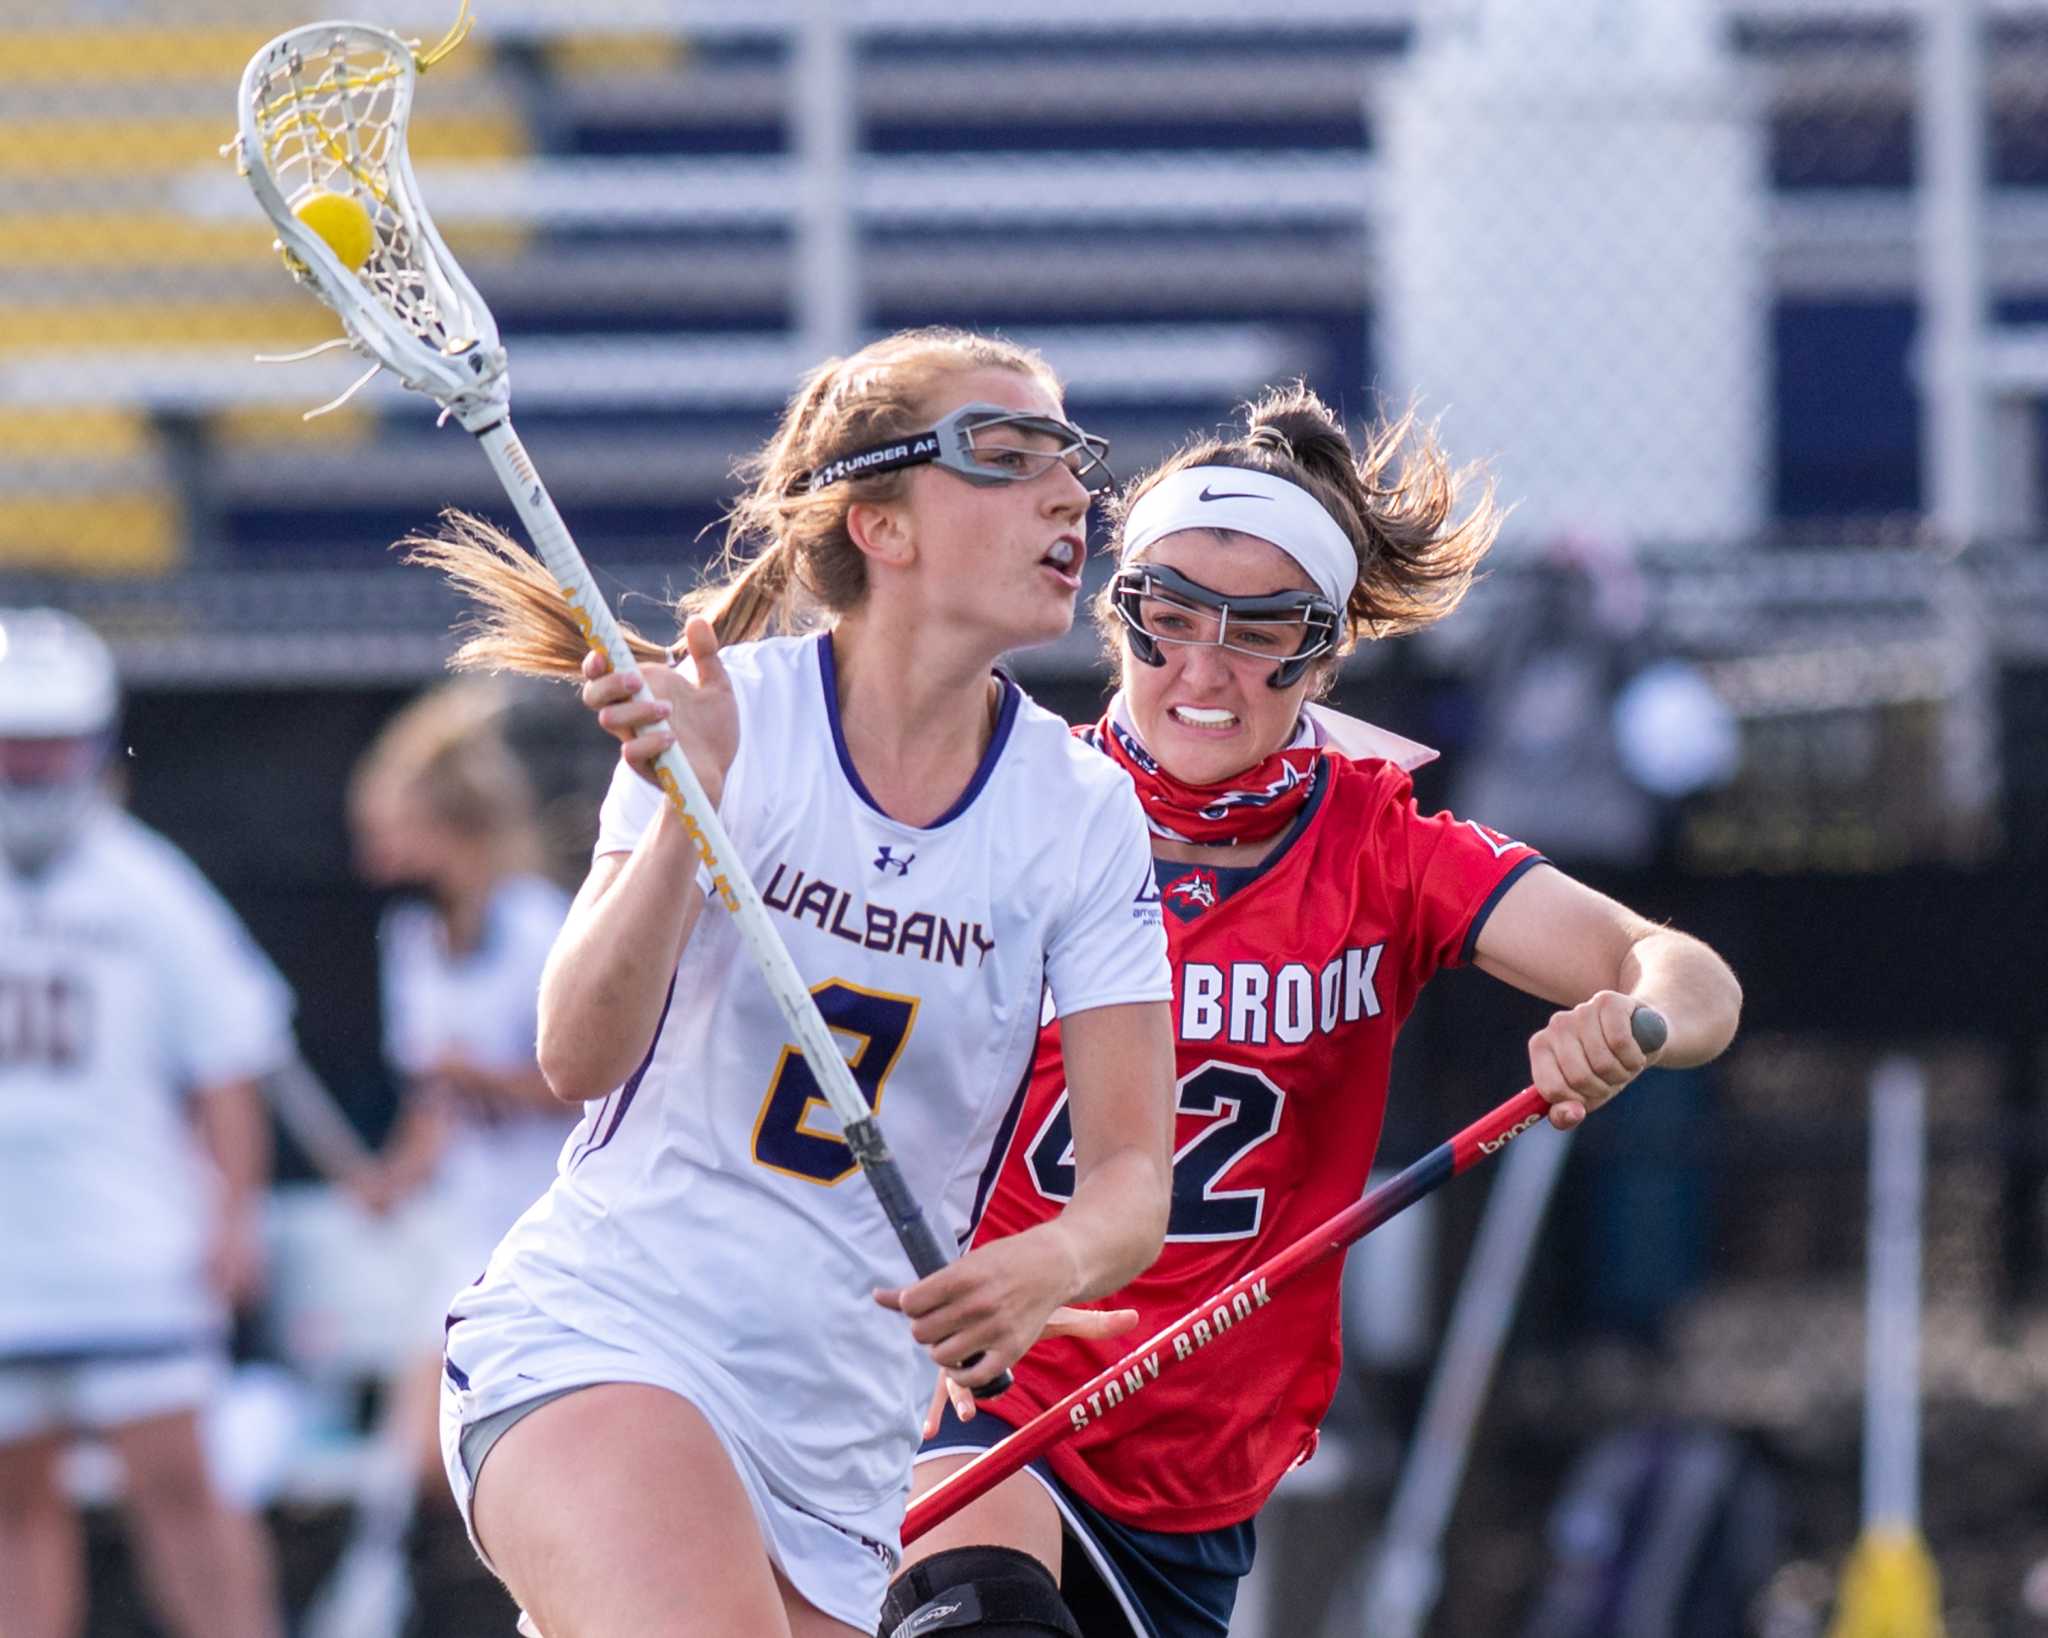 After fast start, UAlbany women's lacrosse loses 16th straight to Stony